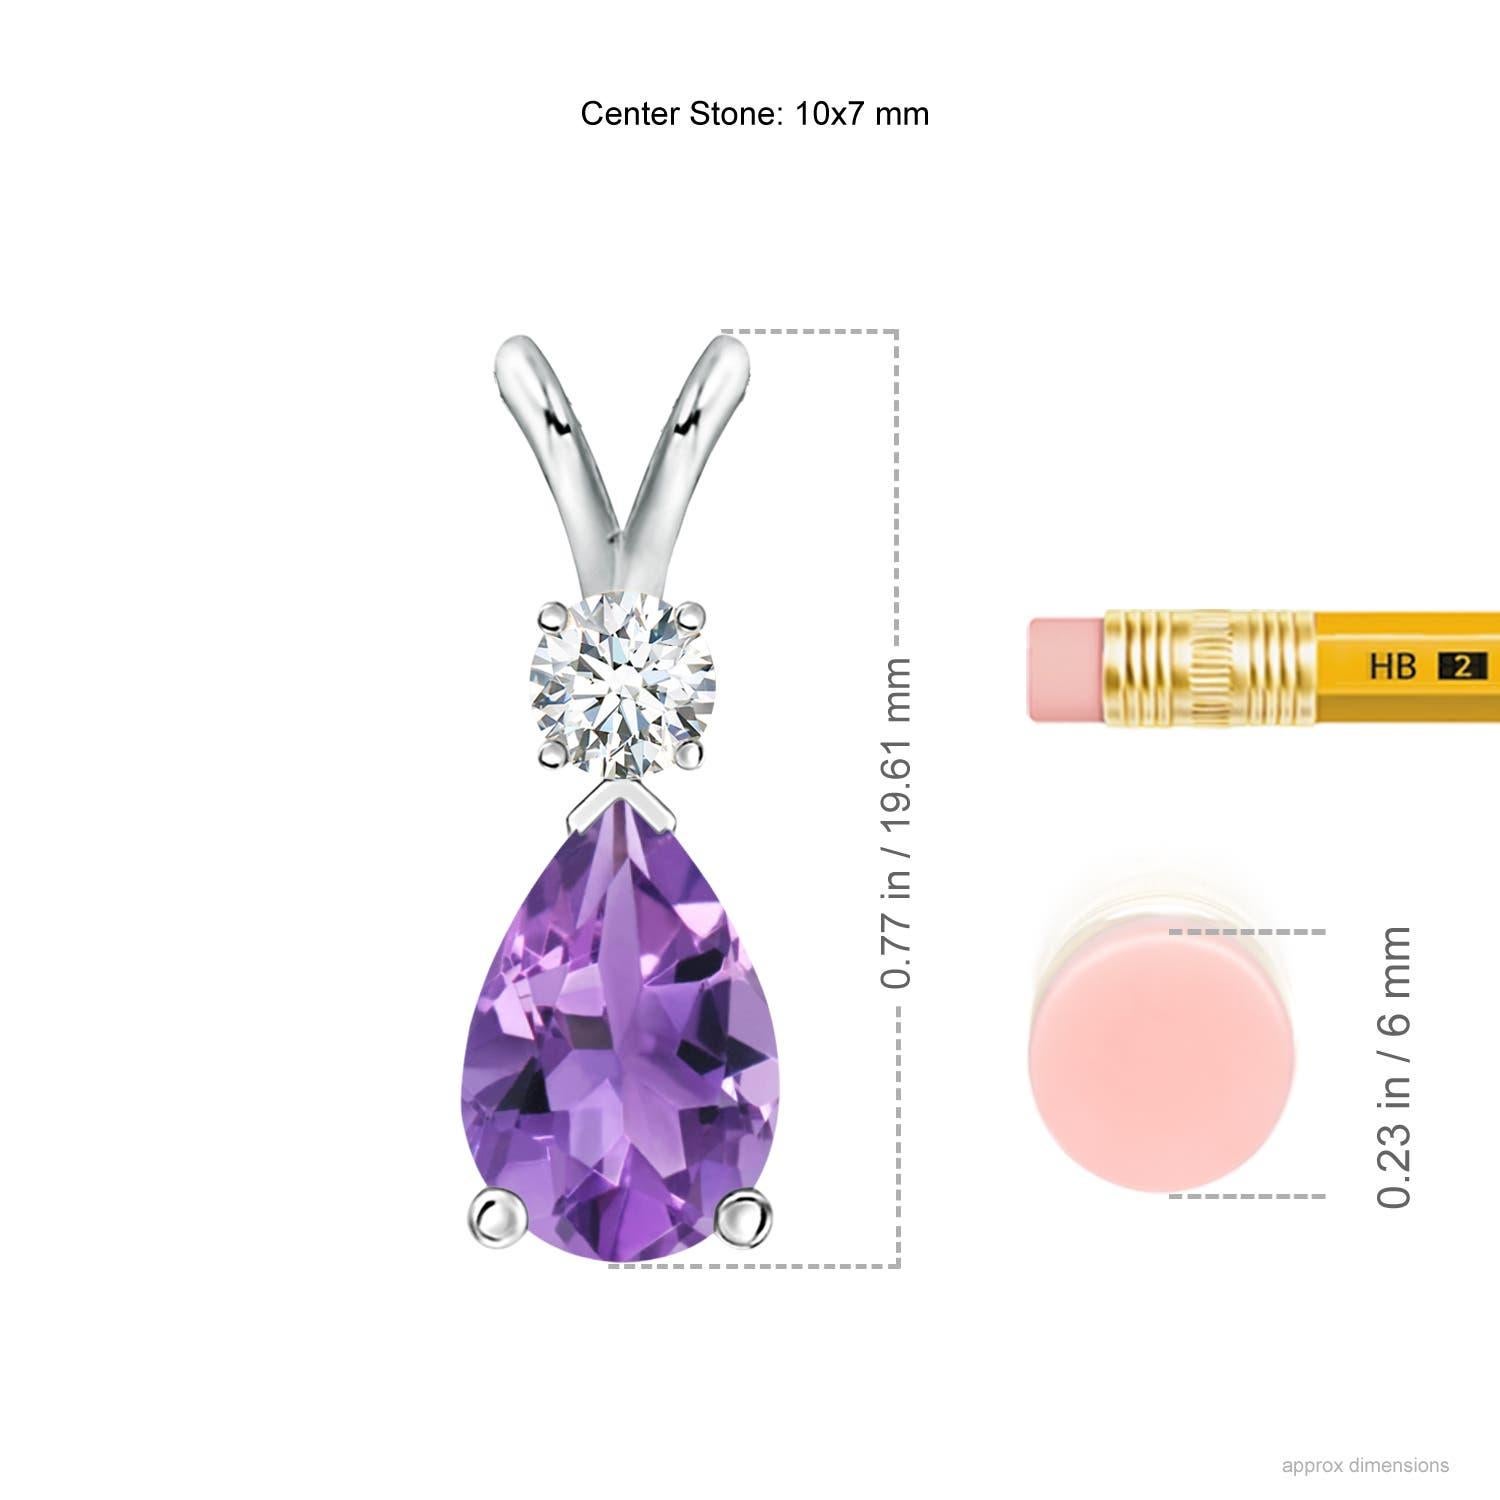 A pear-shaped deep purple amethyst is secured in a prong setting and embellished with a diamond accent on the top. Simple yet stunning, this teardrop amethyst pendant with V bale is sculpted in platinum.
Amethyst is the Birthstone for February and